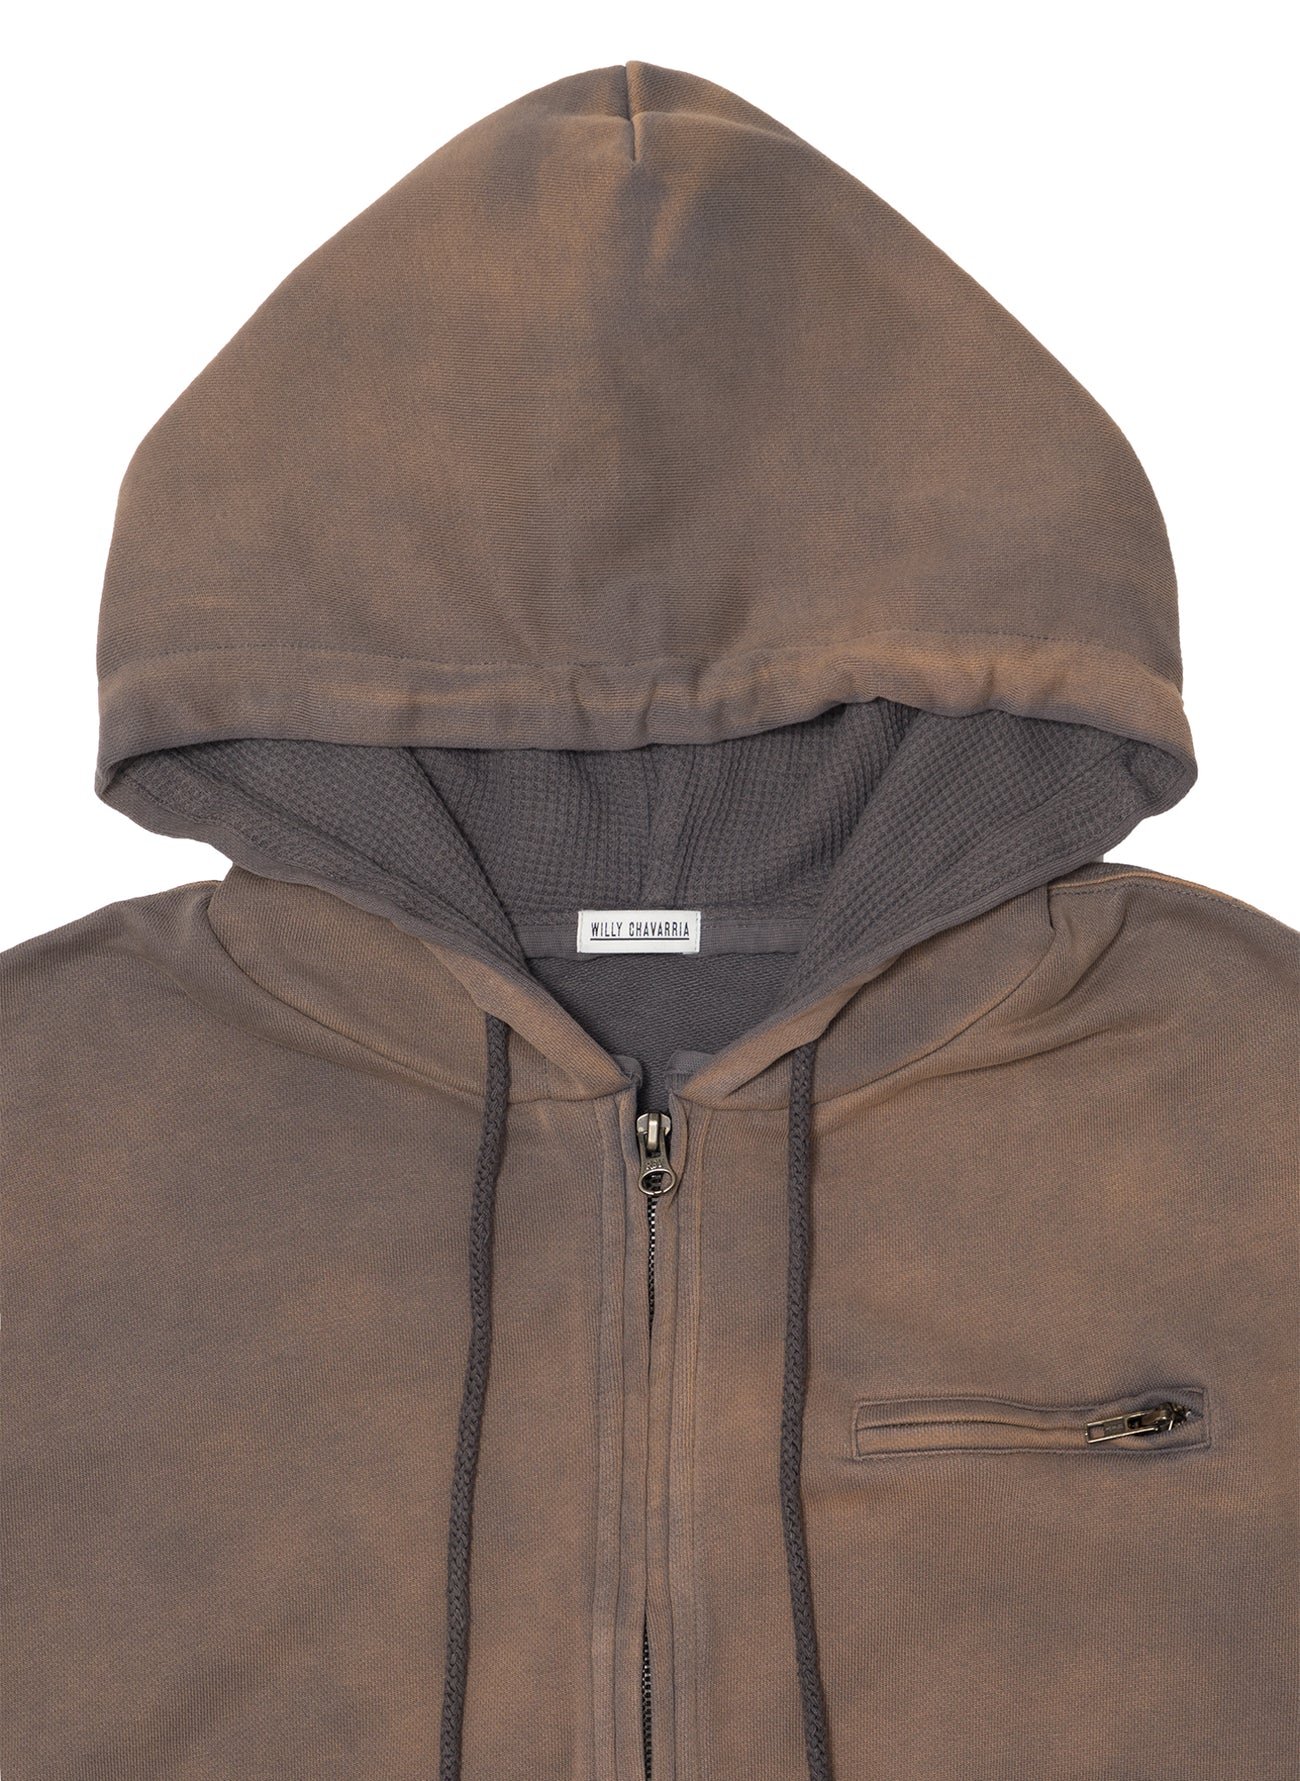 Willy chavarria zip up hoodie - 2